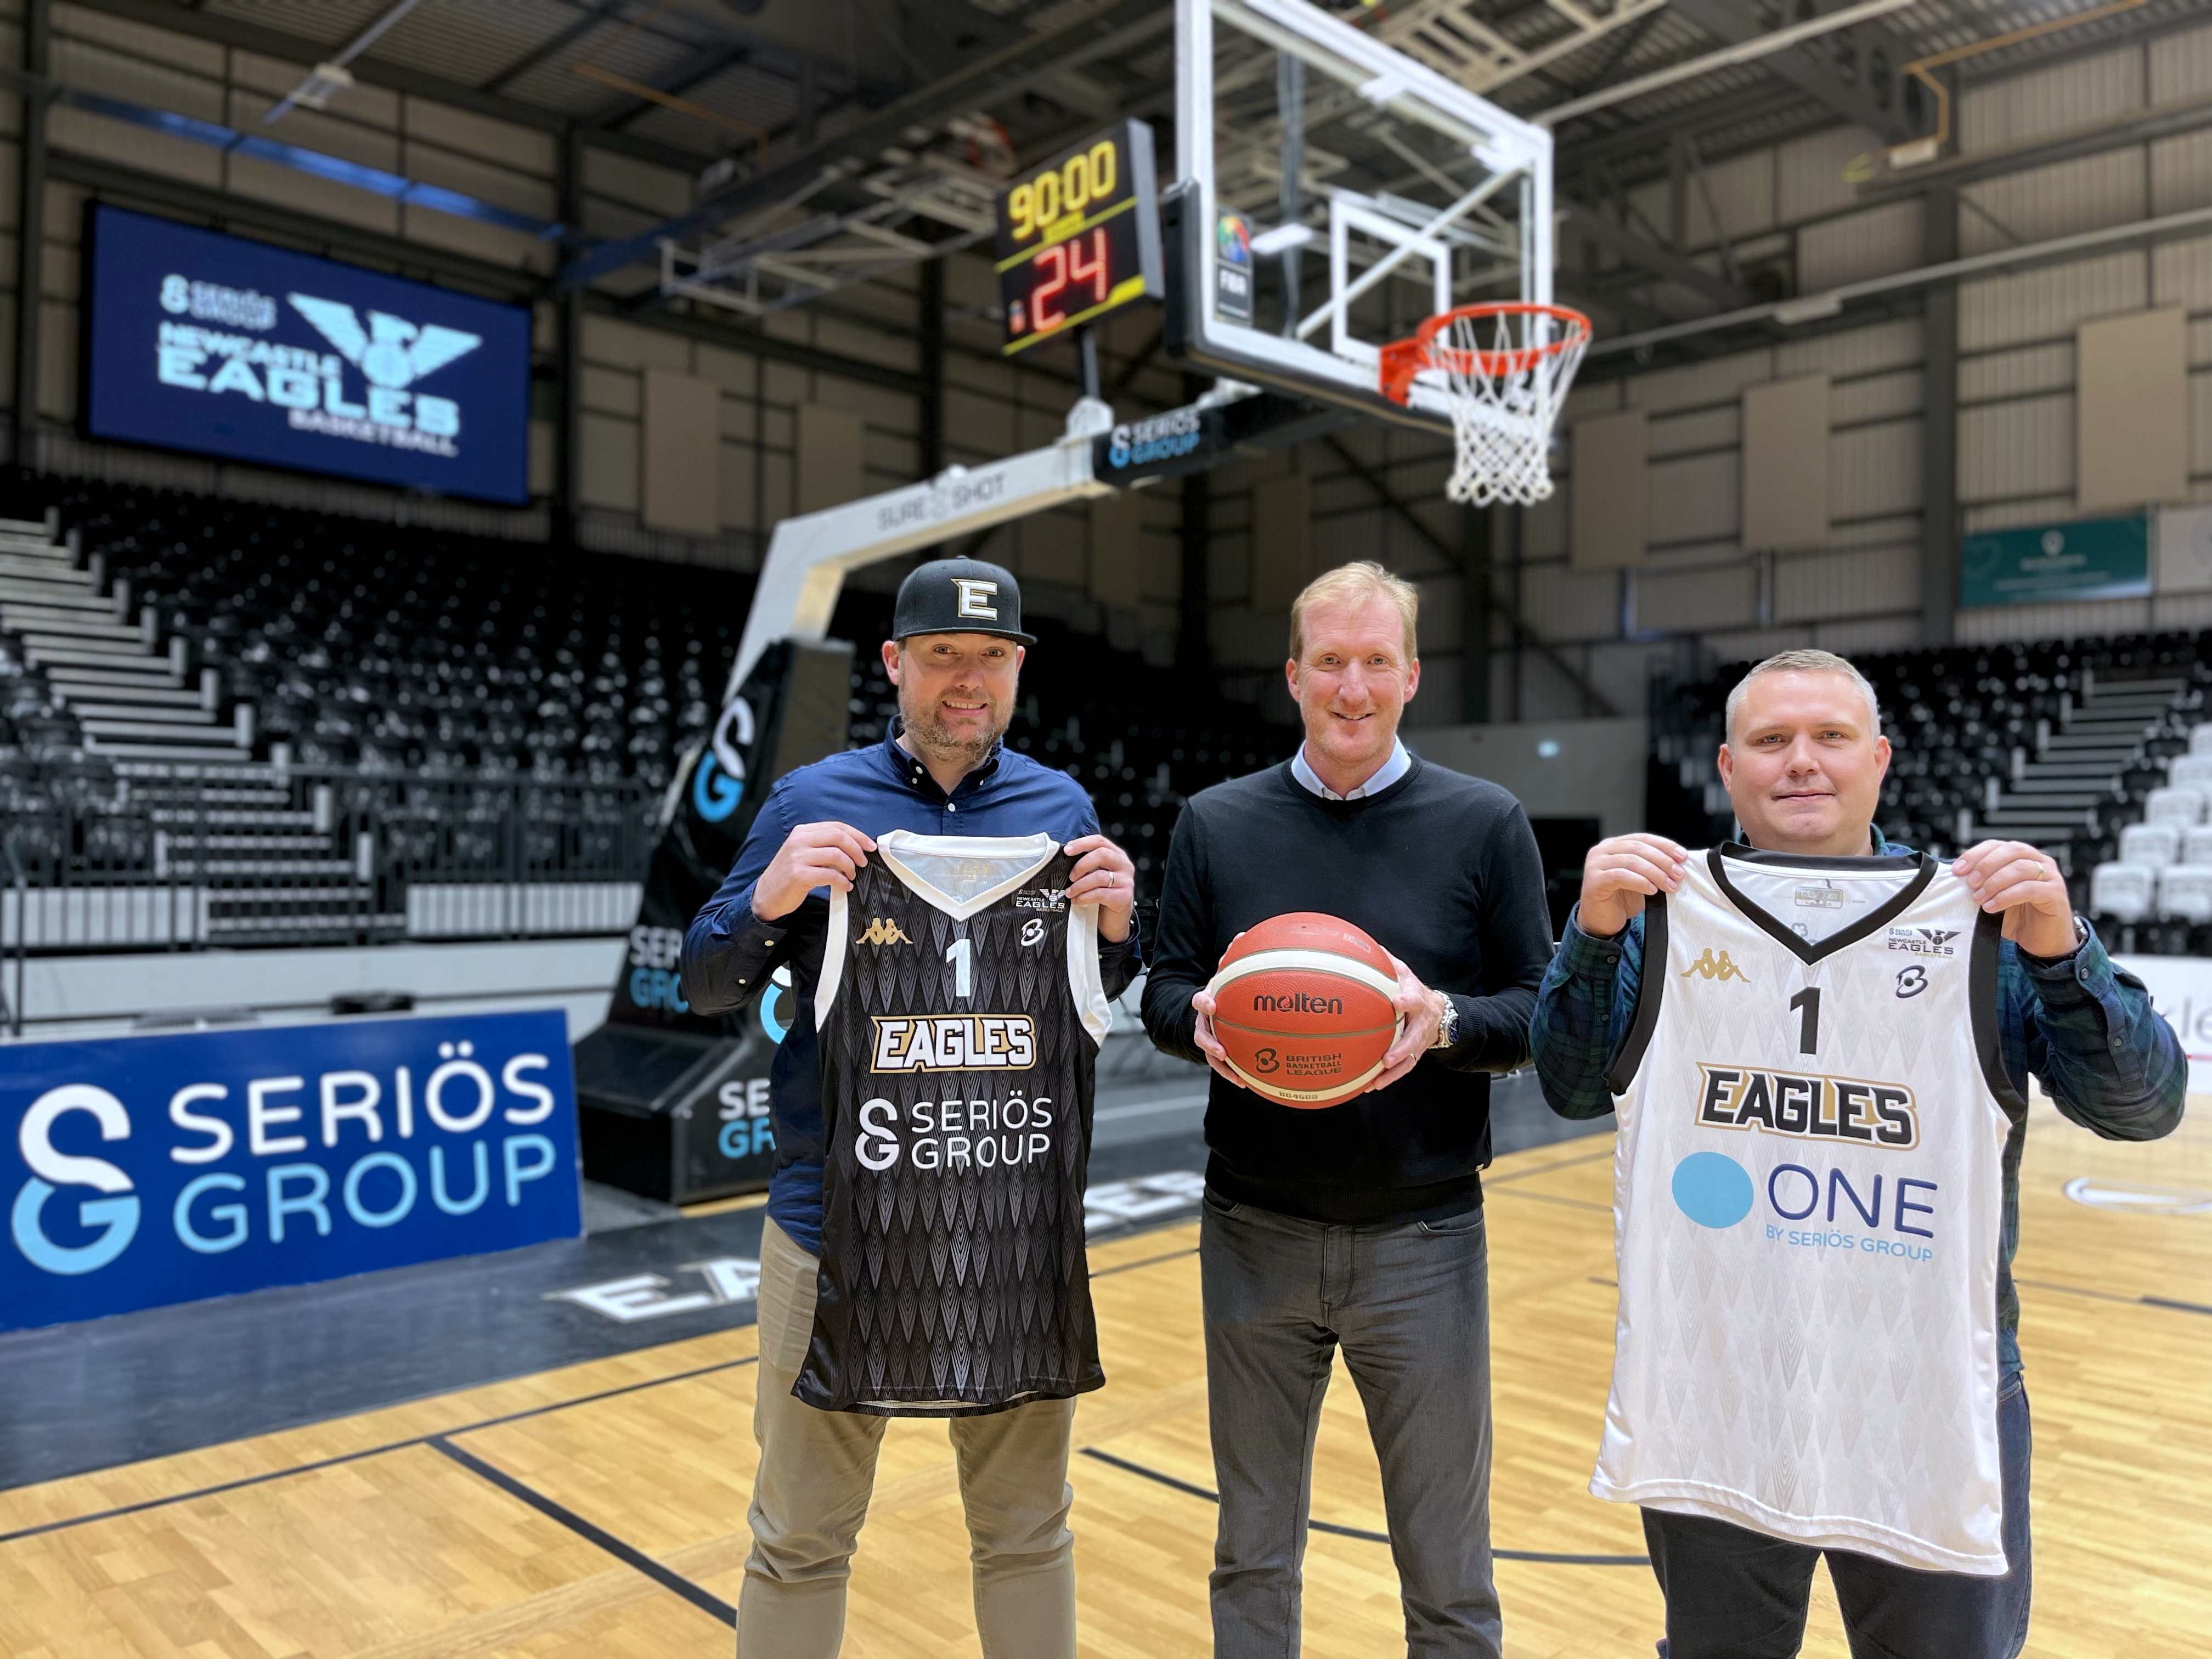 L-R Lee, Paul and David standing on the Newcastle Eagles basketball court, smiling at the camera. Lee and David are holding black and white Newcastle Eagles basketball jersey. Paul is holding a basketball.